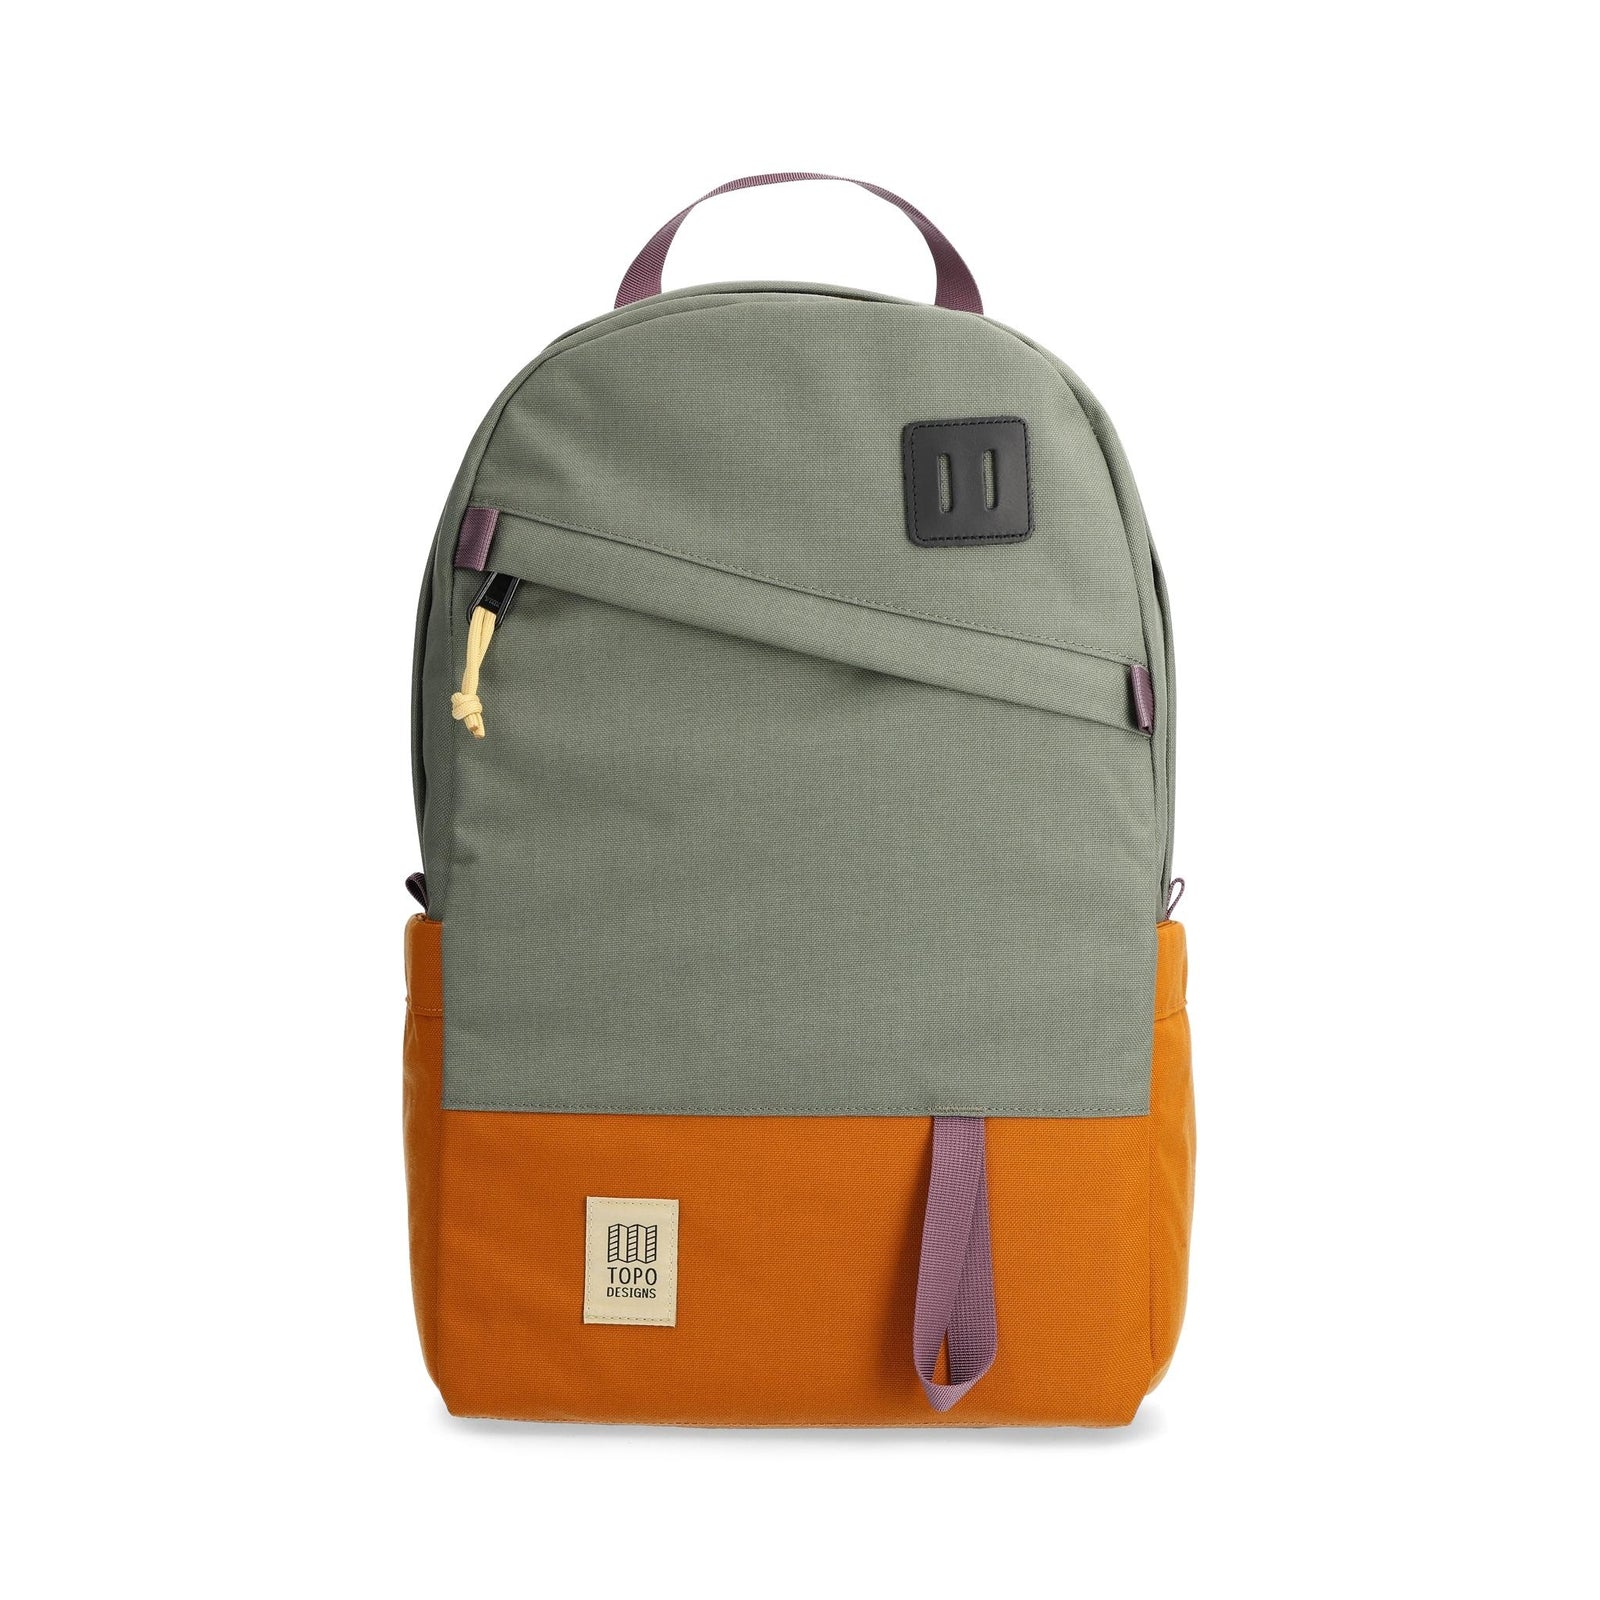 Front View of Topo Designs Daypack Classic in "Beetle / Spice"